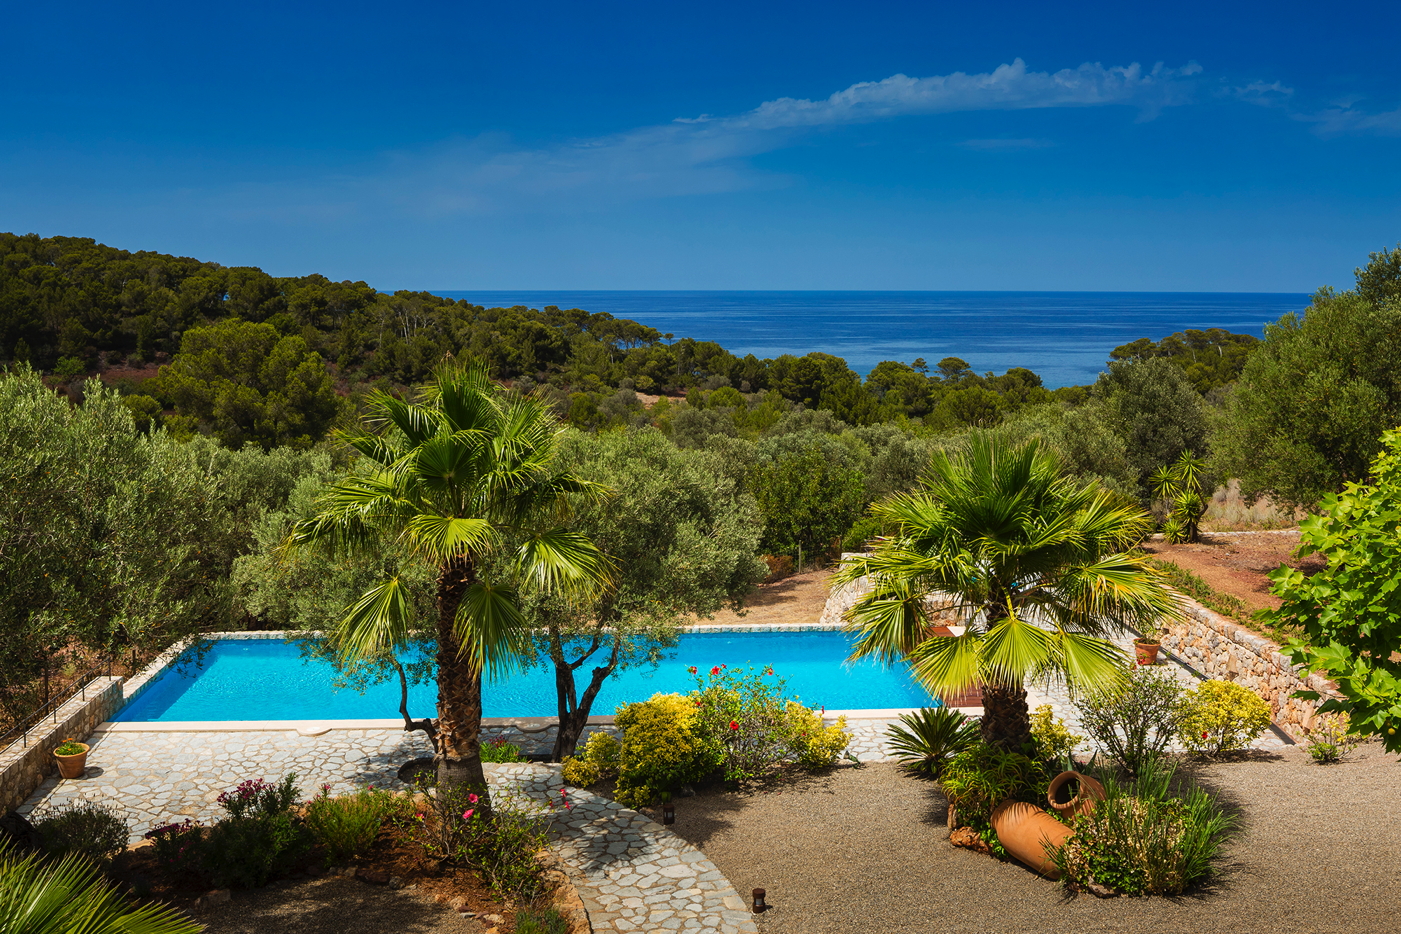 Luxury finca for holiday rental with pool and service Majorca Spain